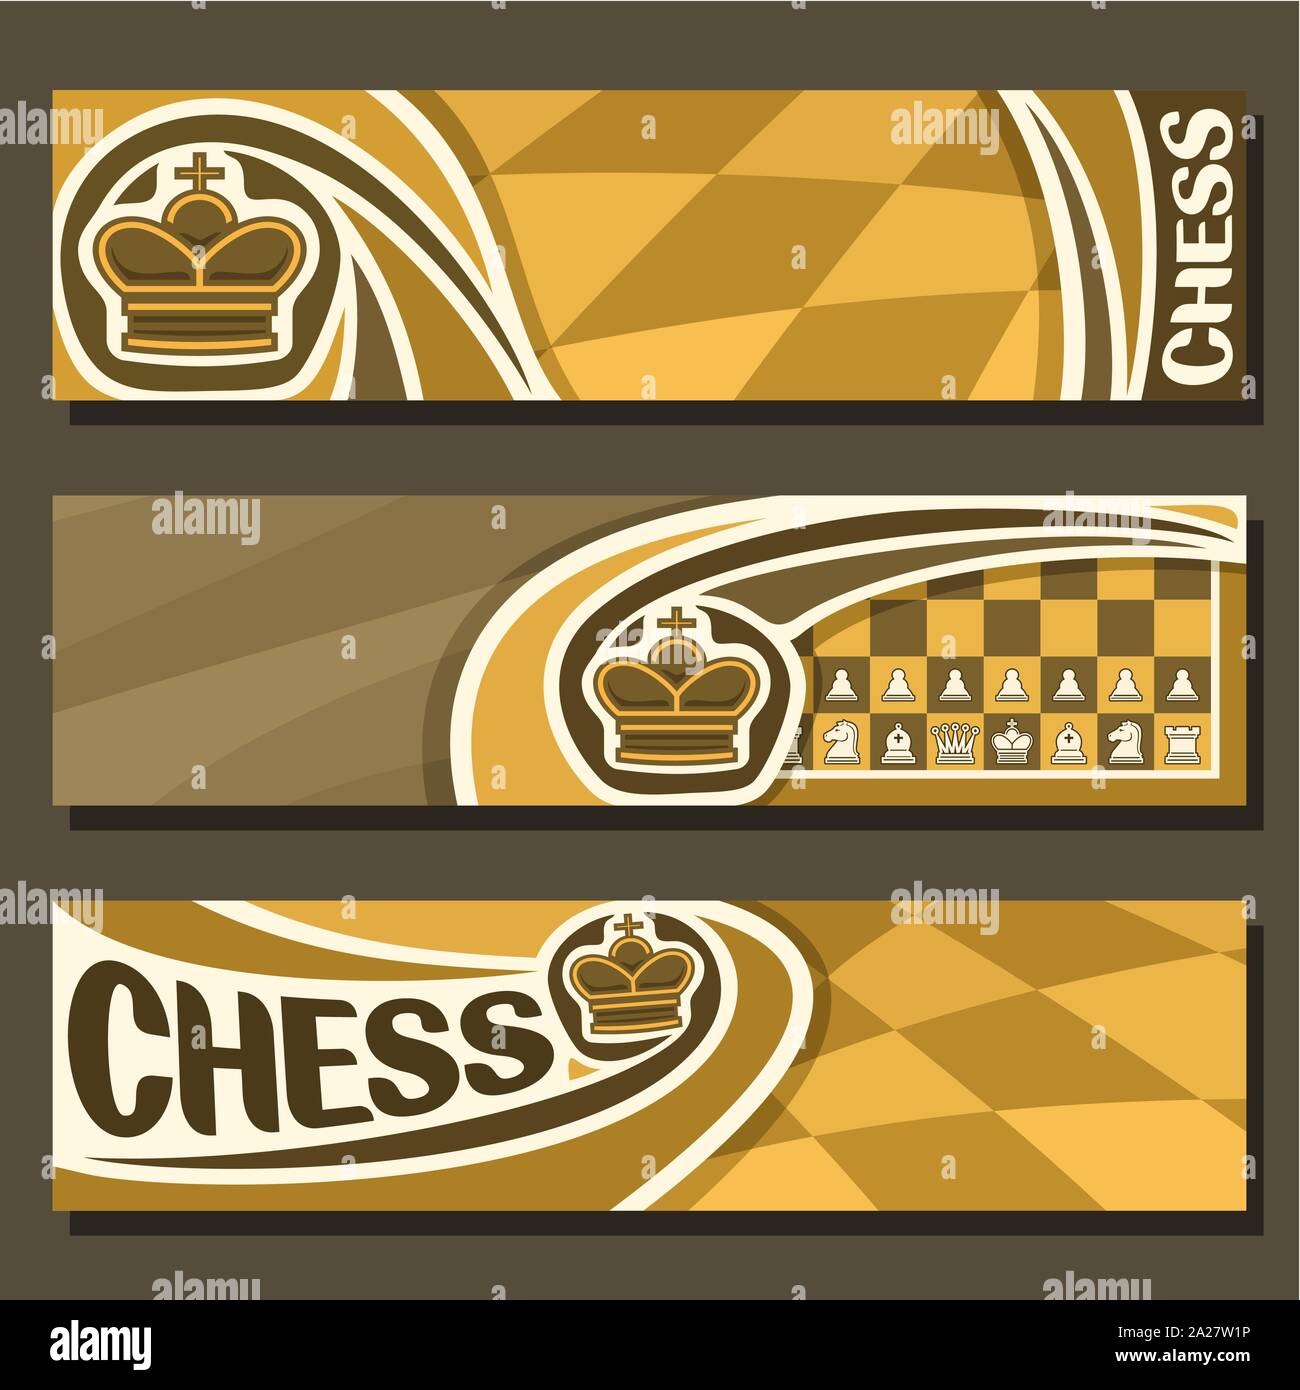 Vector banners for Chess game with copy space, in layouts headers yellow & brown curved checkerboard squares for title on chess theme, original font f Stock Vector